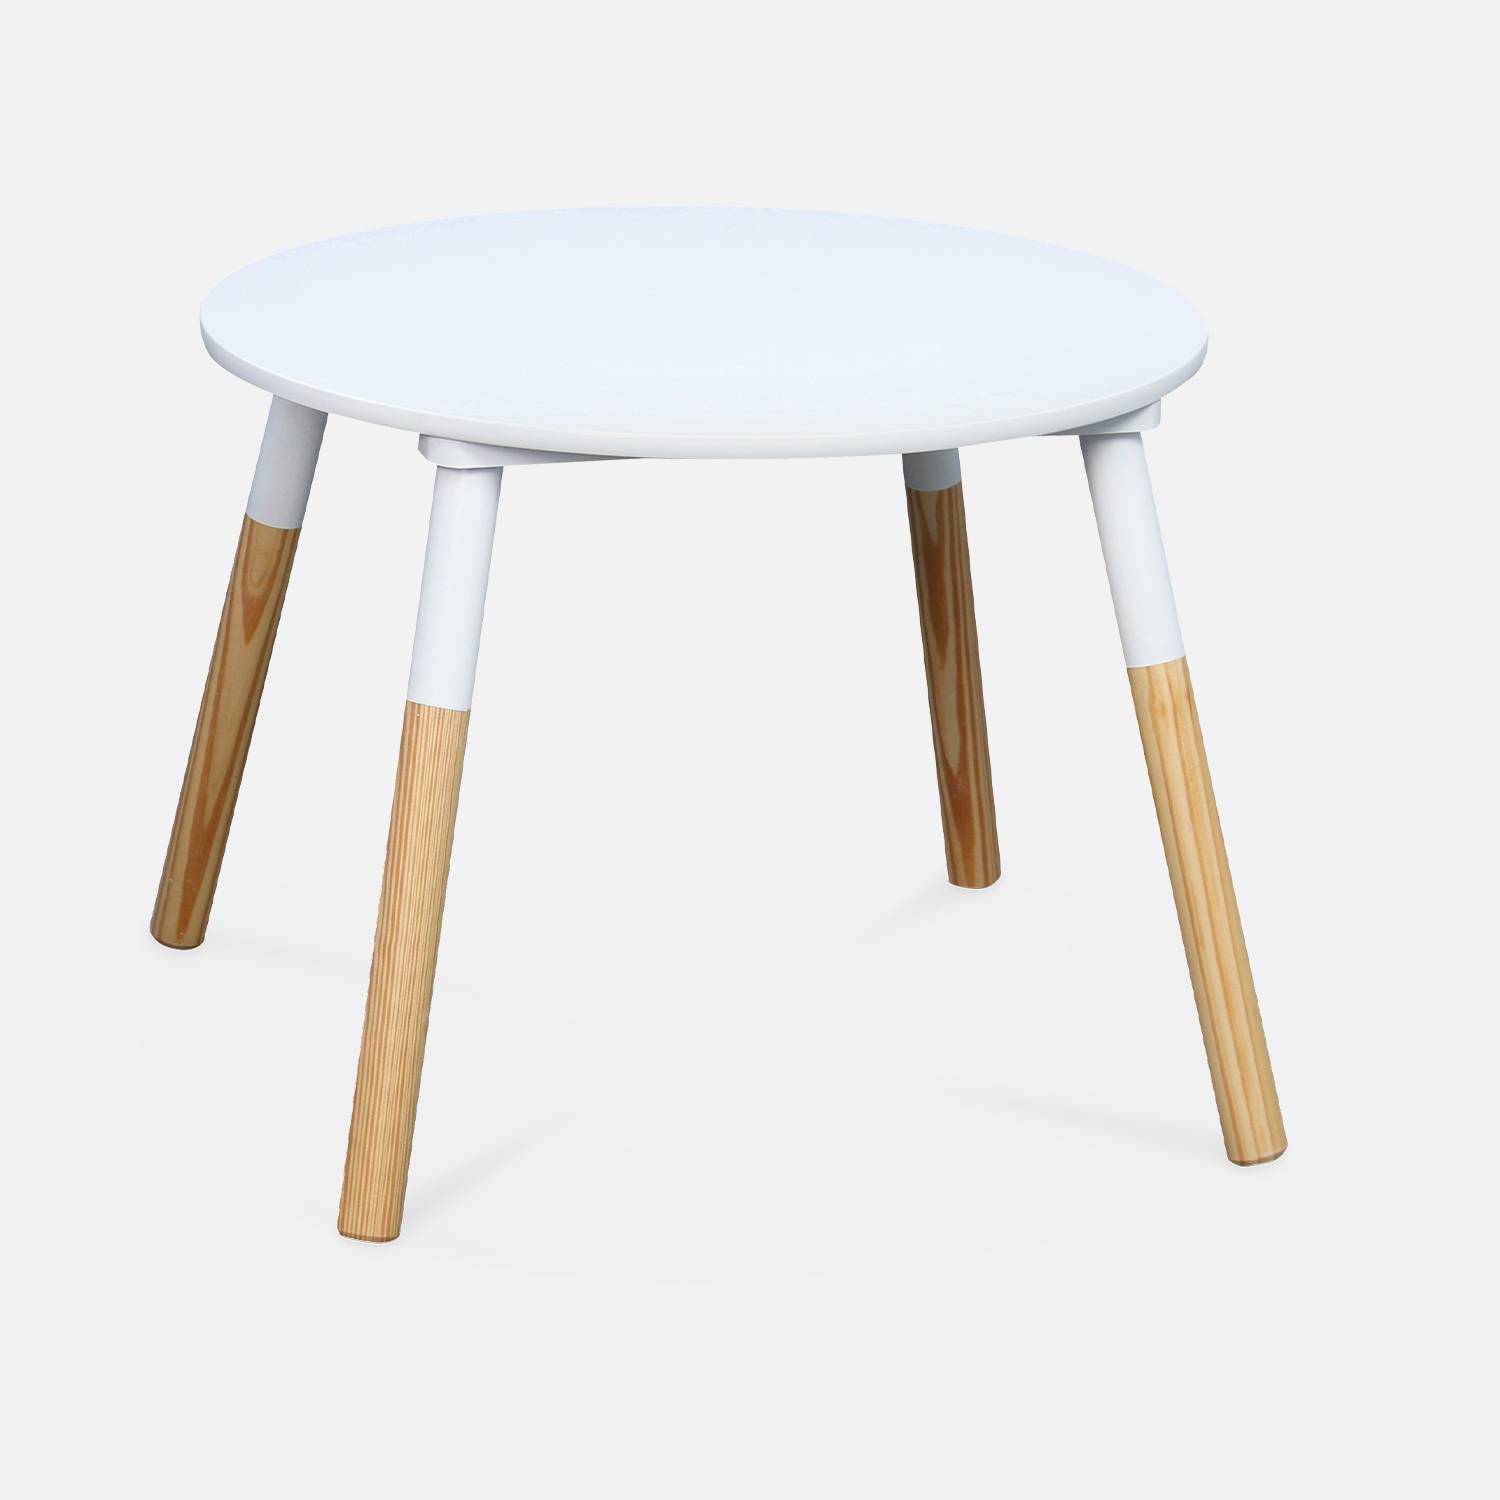 Children's round table with two stools, 55x55x43cm - Tobias - natural pine, painted White,sweeek,Photo5